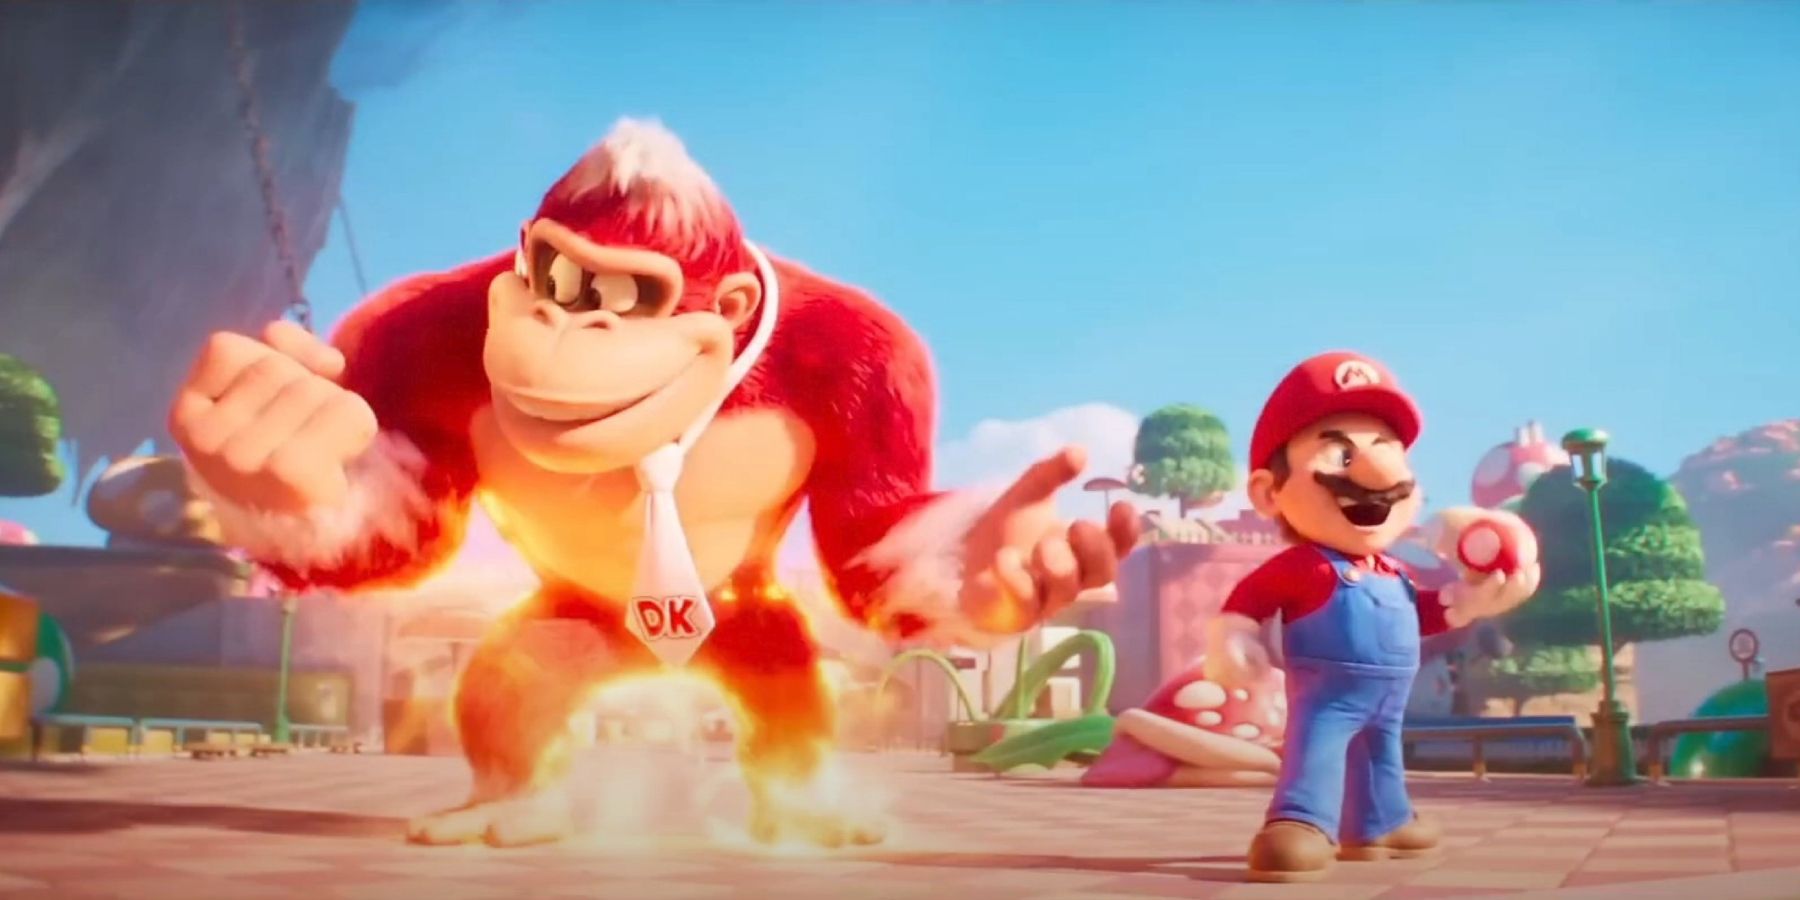 Fire Donkey Kong and Mario in Super Mario Bros. final movie trailer